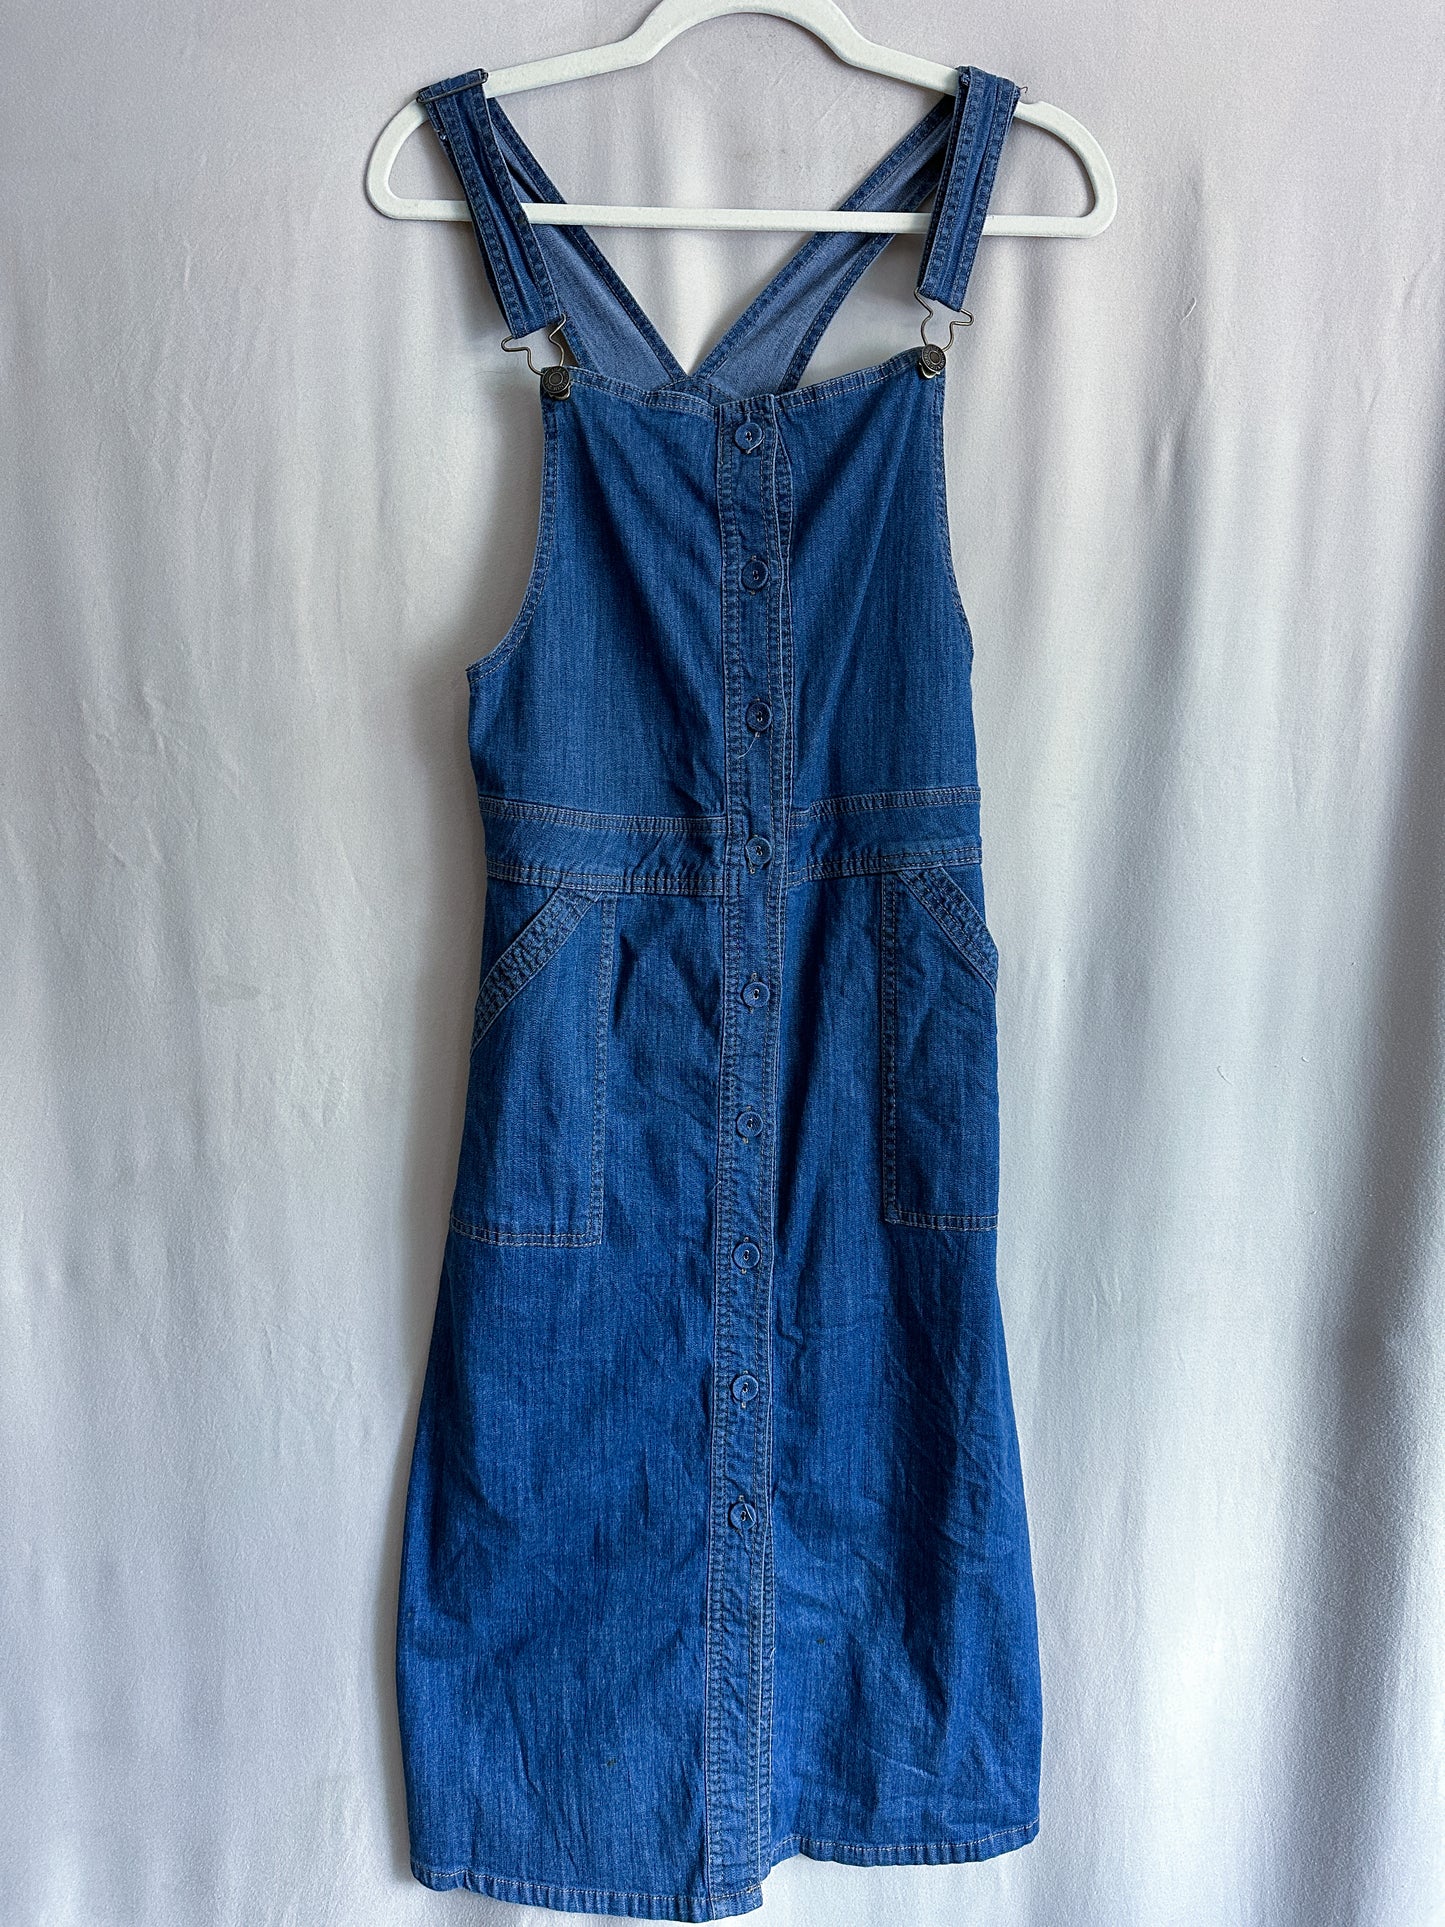 Denim Button Front Overall Dress (fits size 0-2)